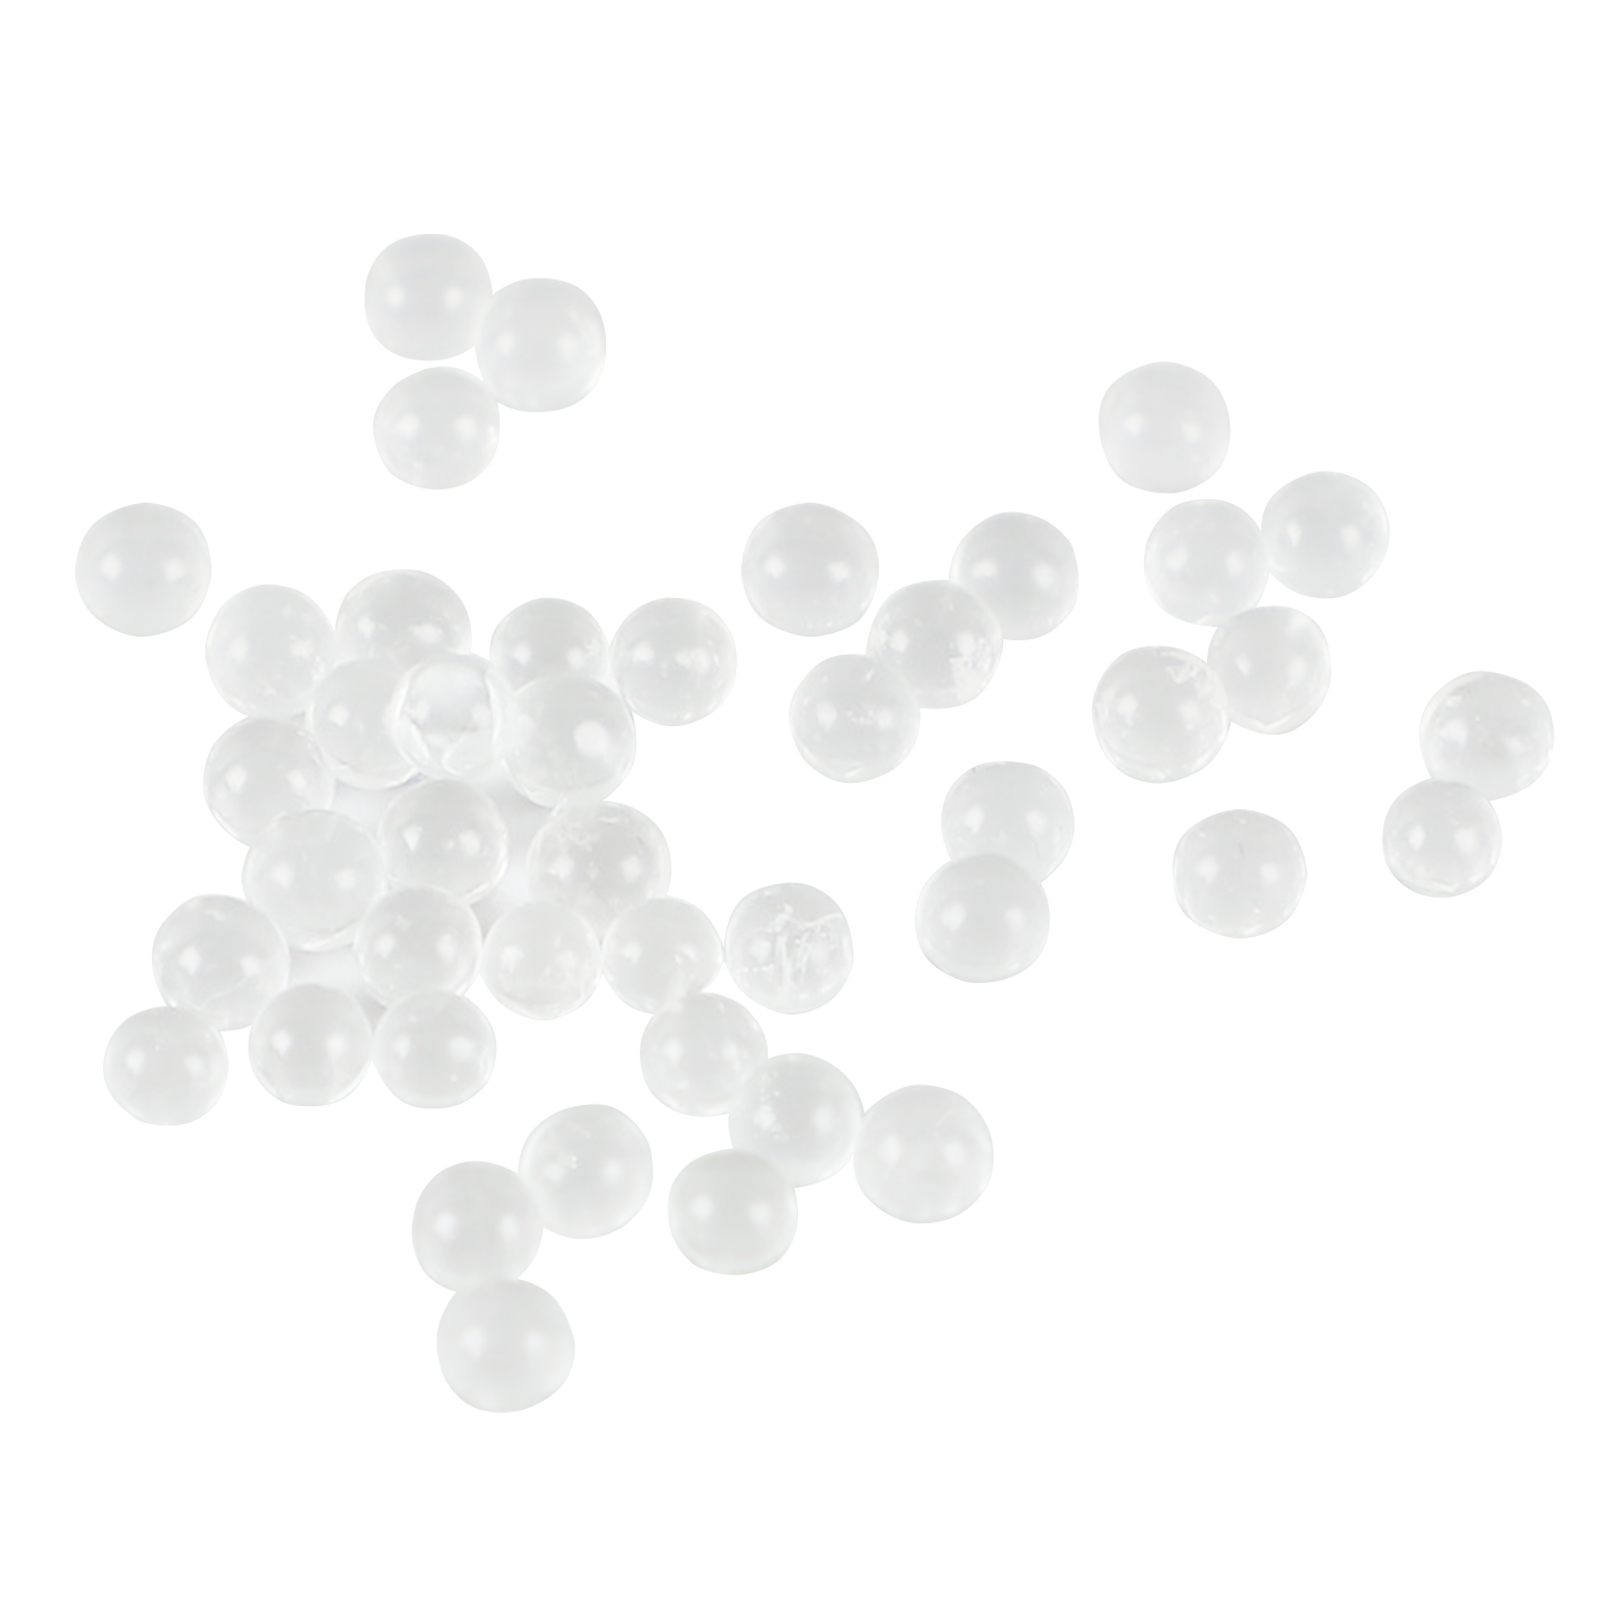 ADAMAS BETA Wholesale Glass Grinding Beads 1kg/Bag Daimeter 0.2-5mm Solid Round Clear Glass Balls Laboratory Boiling Stones